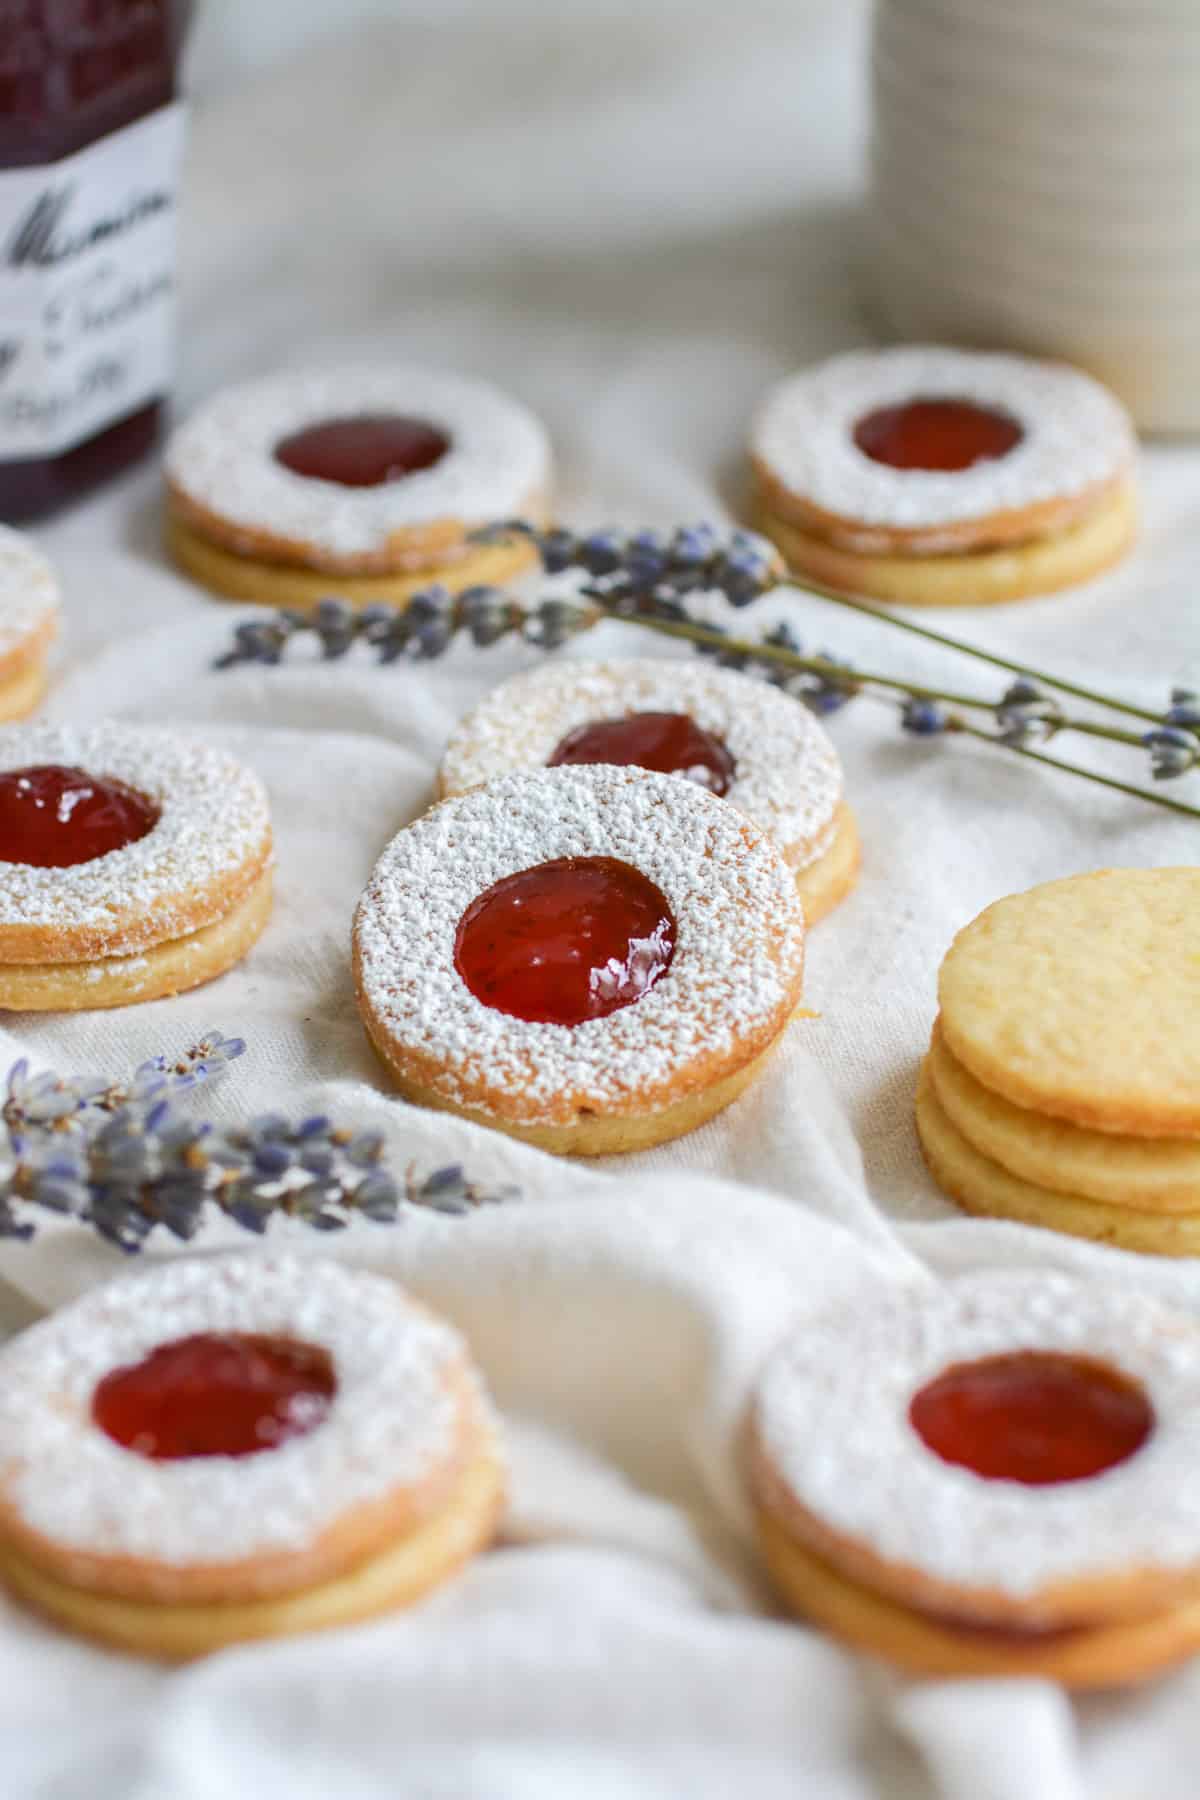 Vegan Nut Free Linzer Cookies filled with strawberry jam on a white cloth.